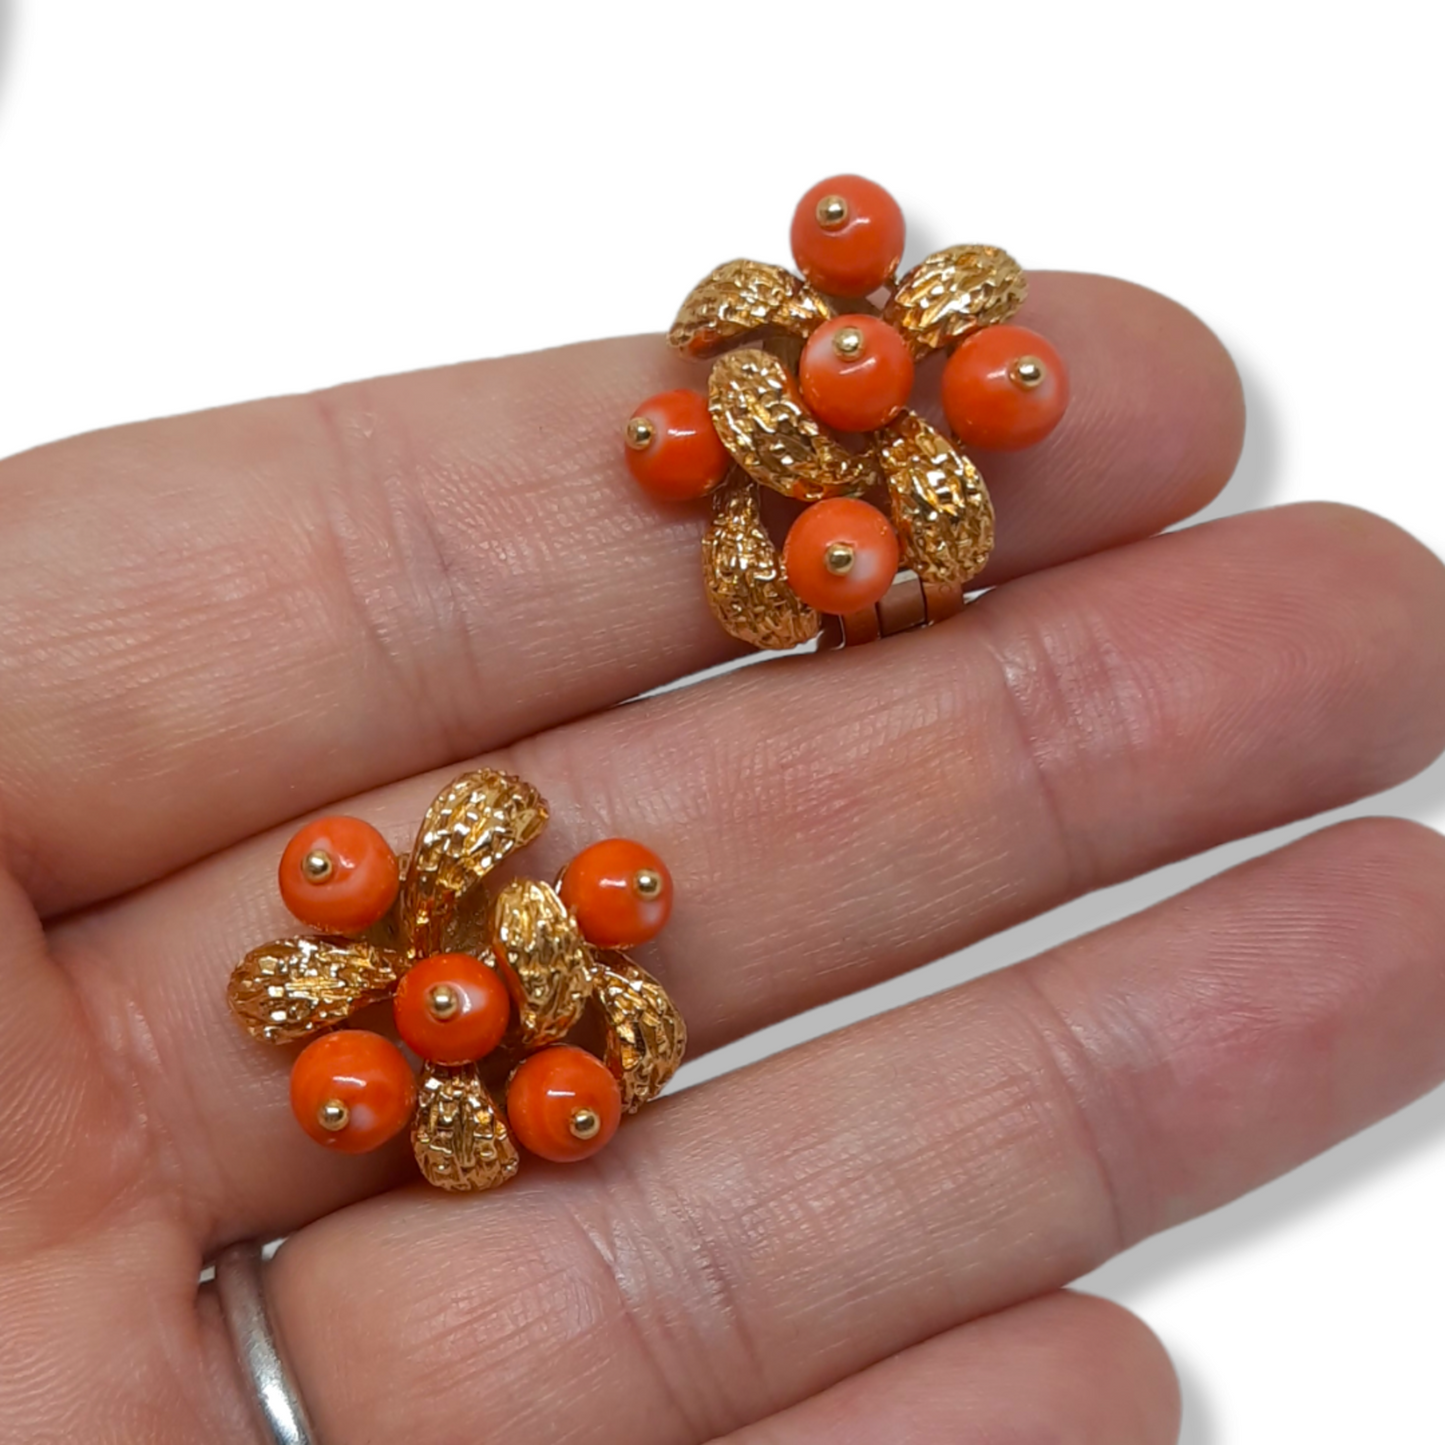 Van Cleef & Arpels French 1970s 18KT Yellow Gold & Coral Earrings in hand